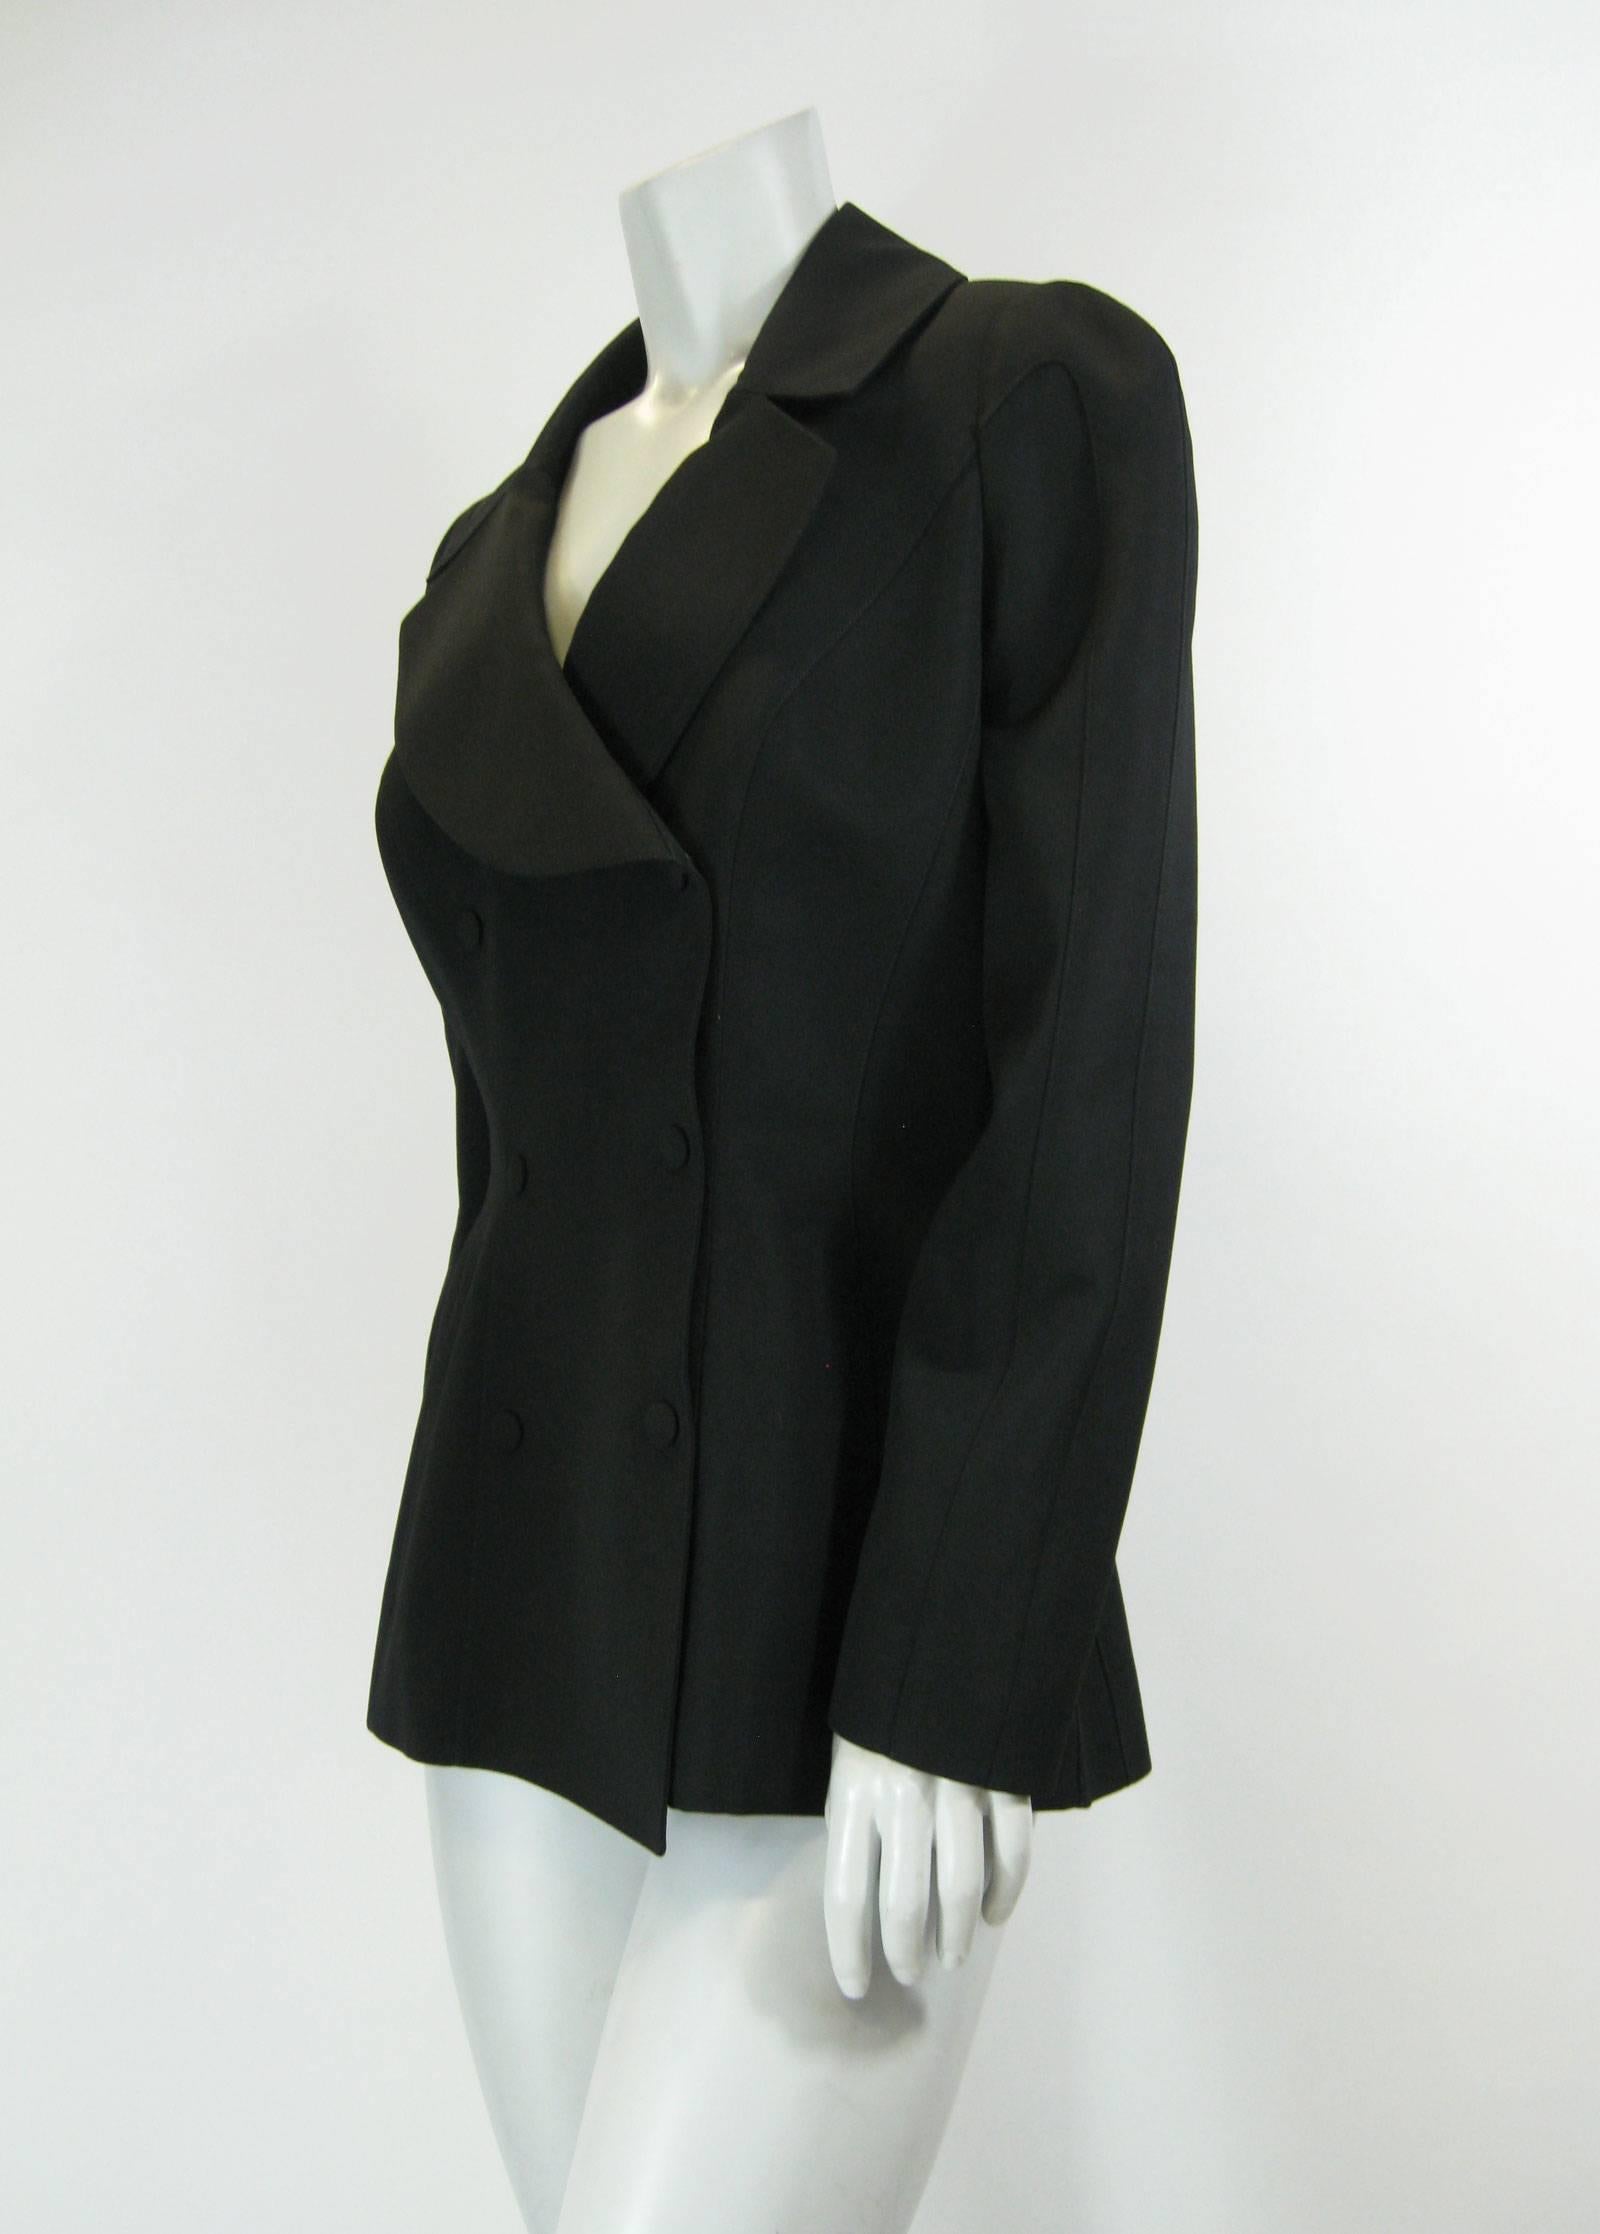 Vintage Thierry Mugler black shaped jacket.
80's does 40's style.
Double breasted with hidden snap closures.
Deep neckline.
Slit pockets.
Lined.
No size tag.

Bust: 38”
Waist: 30